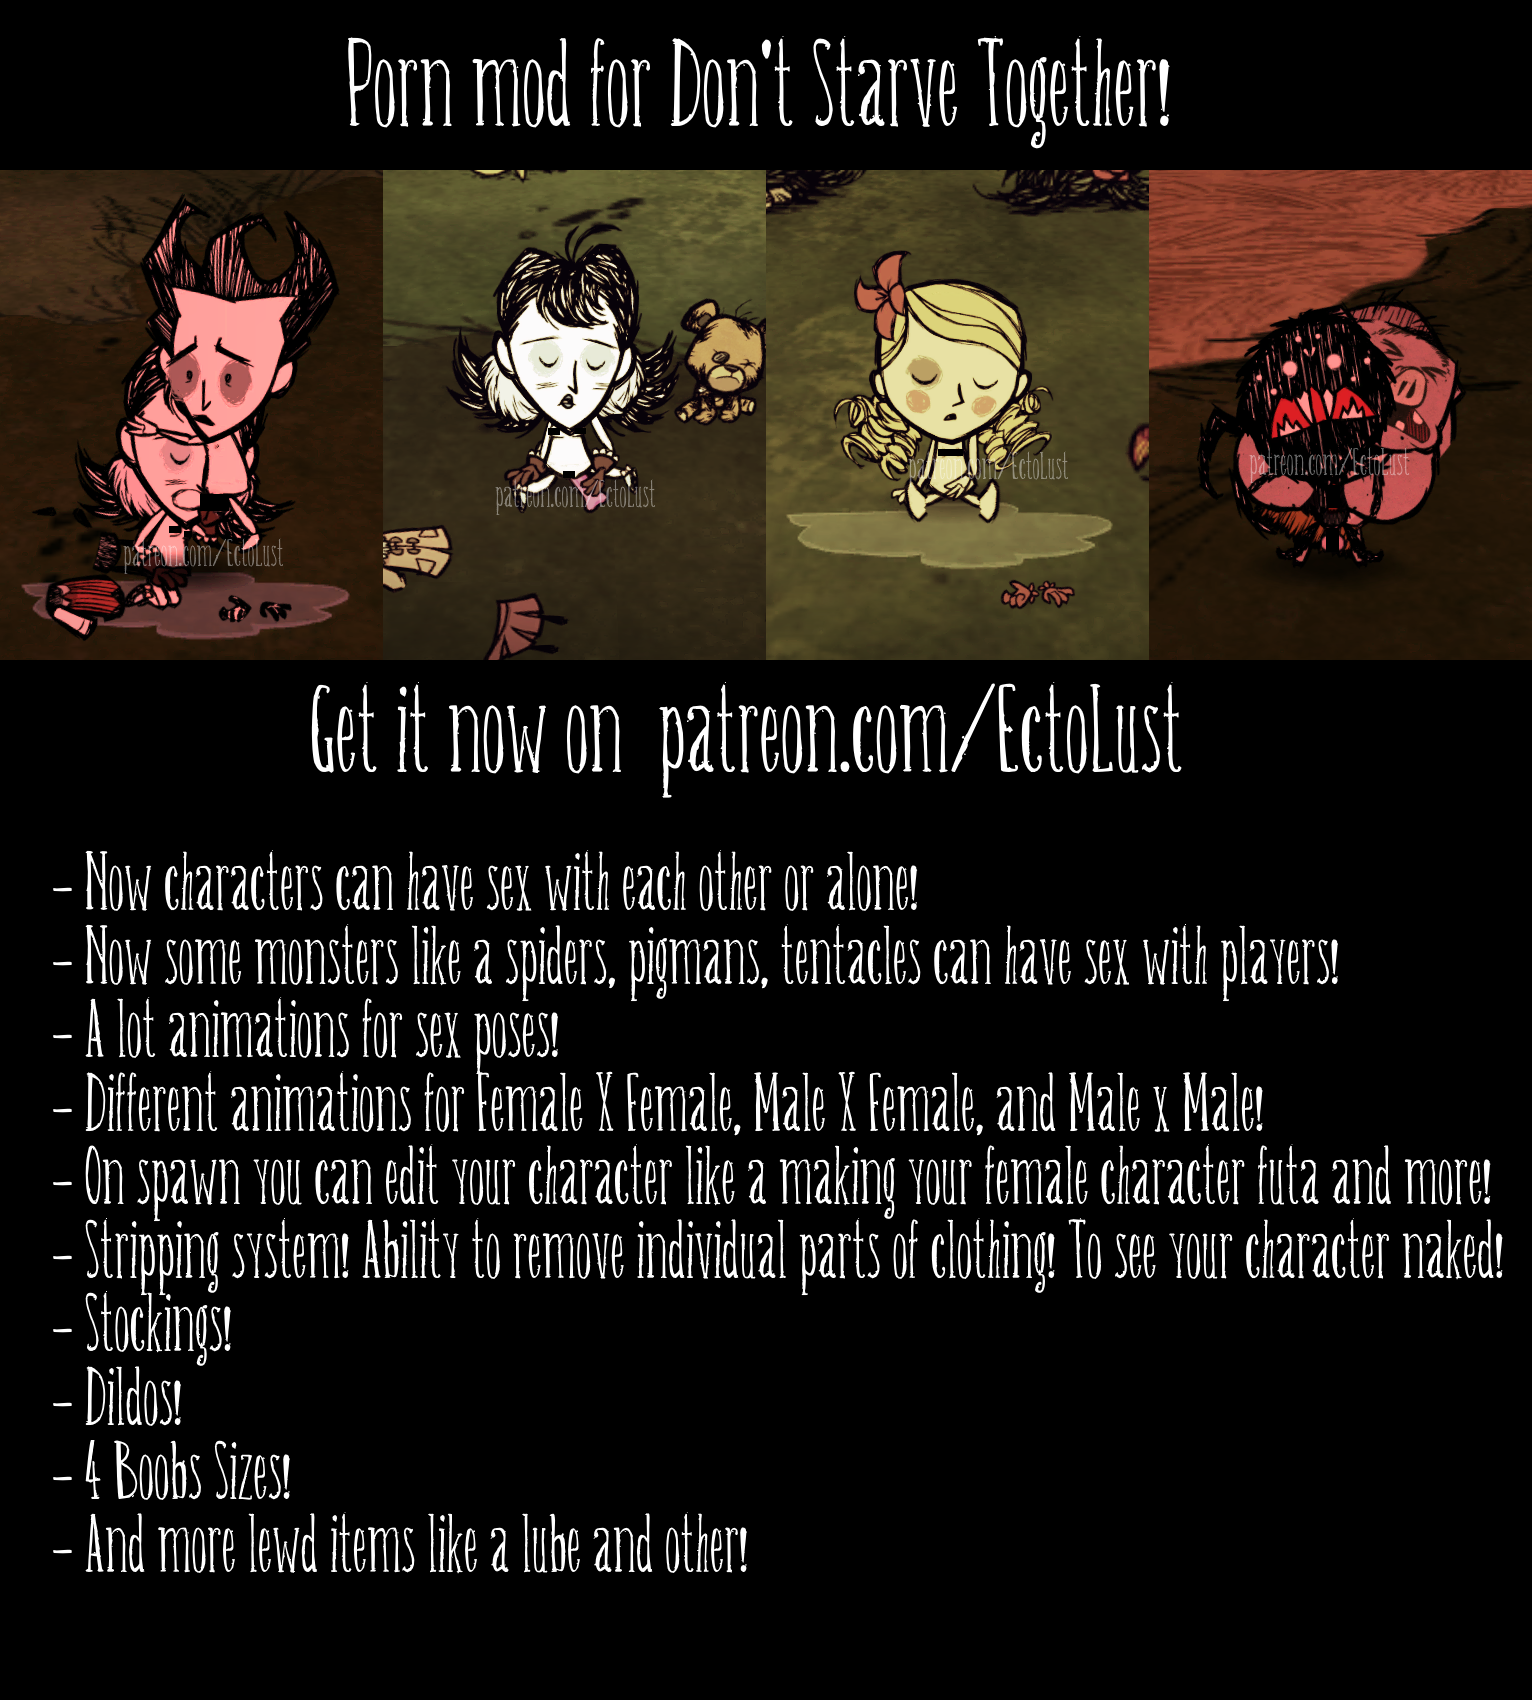 If Anyone Is Interested I Found An Open Source Sex Mod For Don T Starve